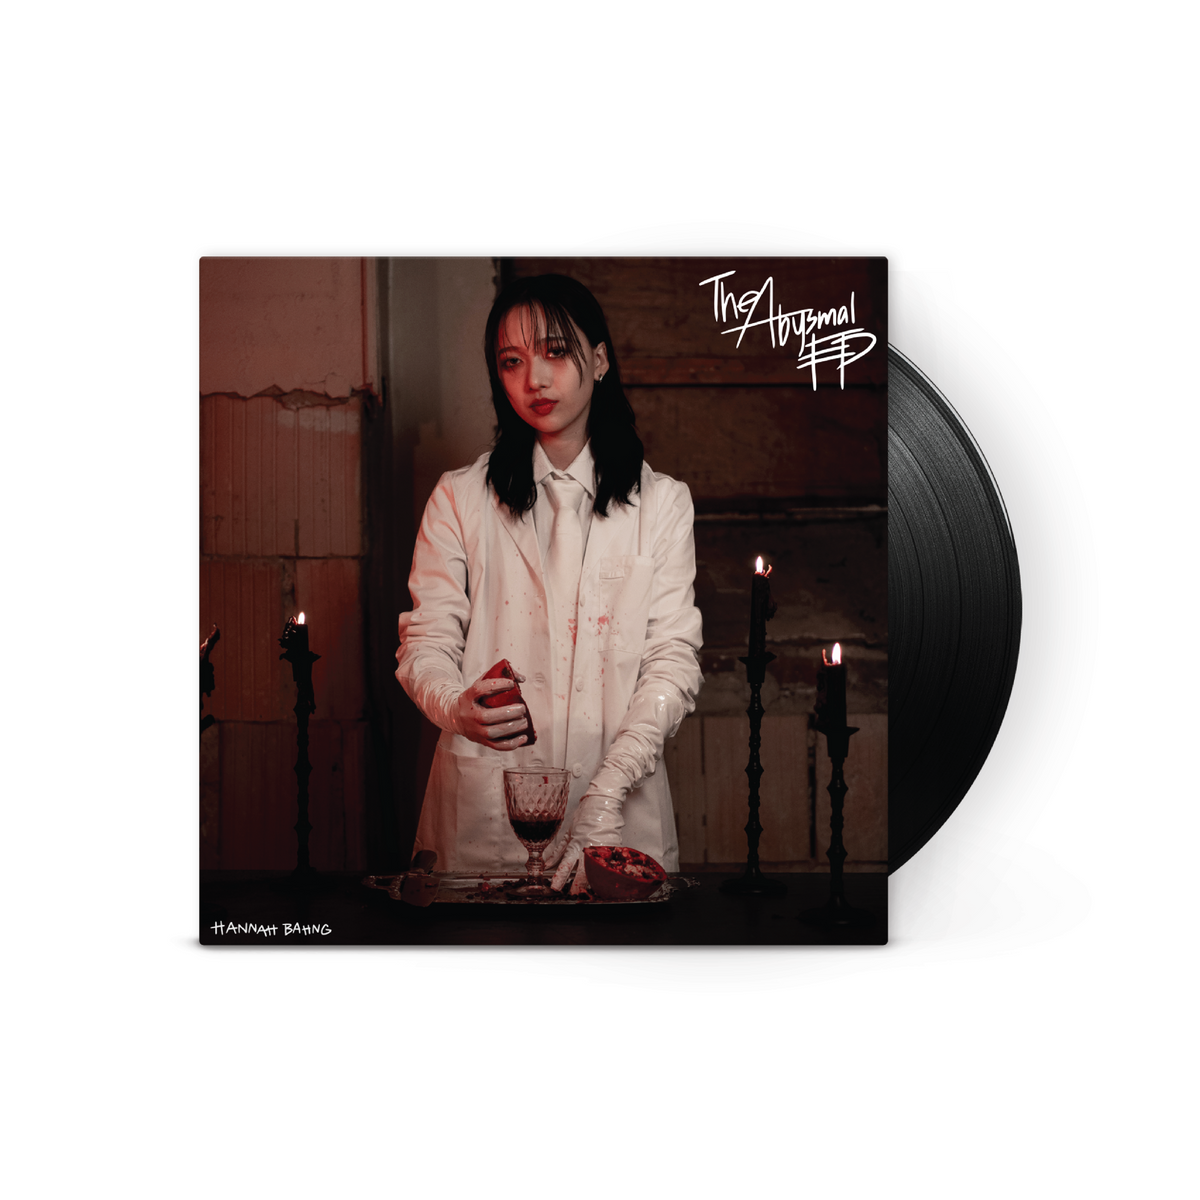 hannah bahng - The Abysmal EP: 10" (POMEGRANATE ver.)